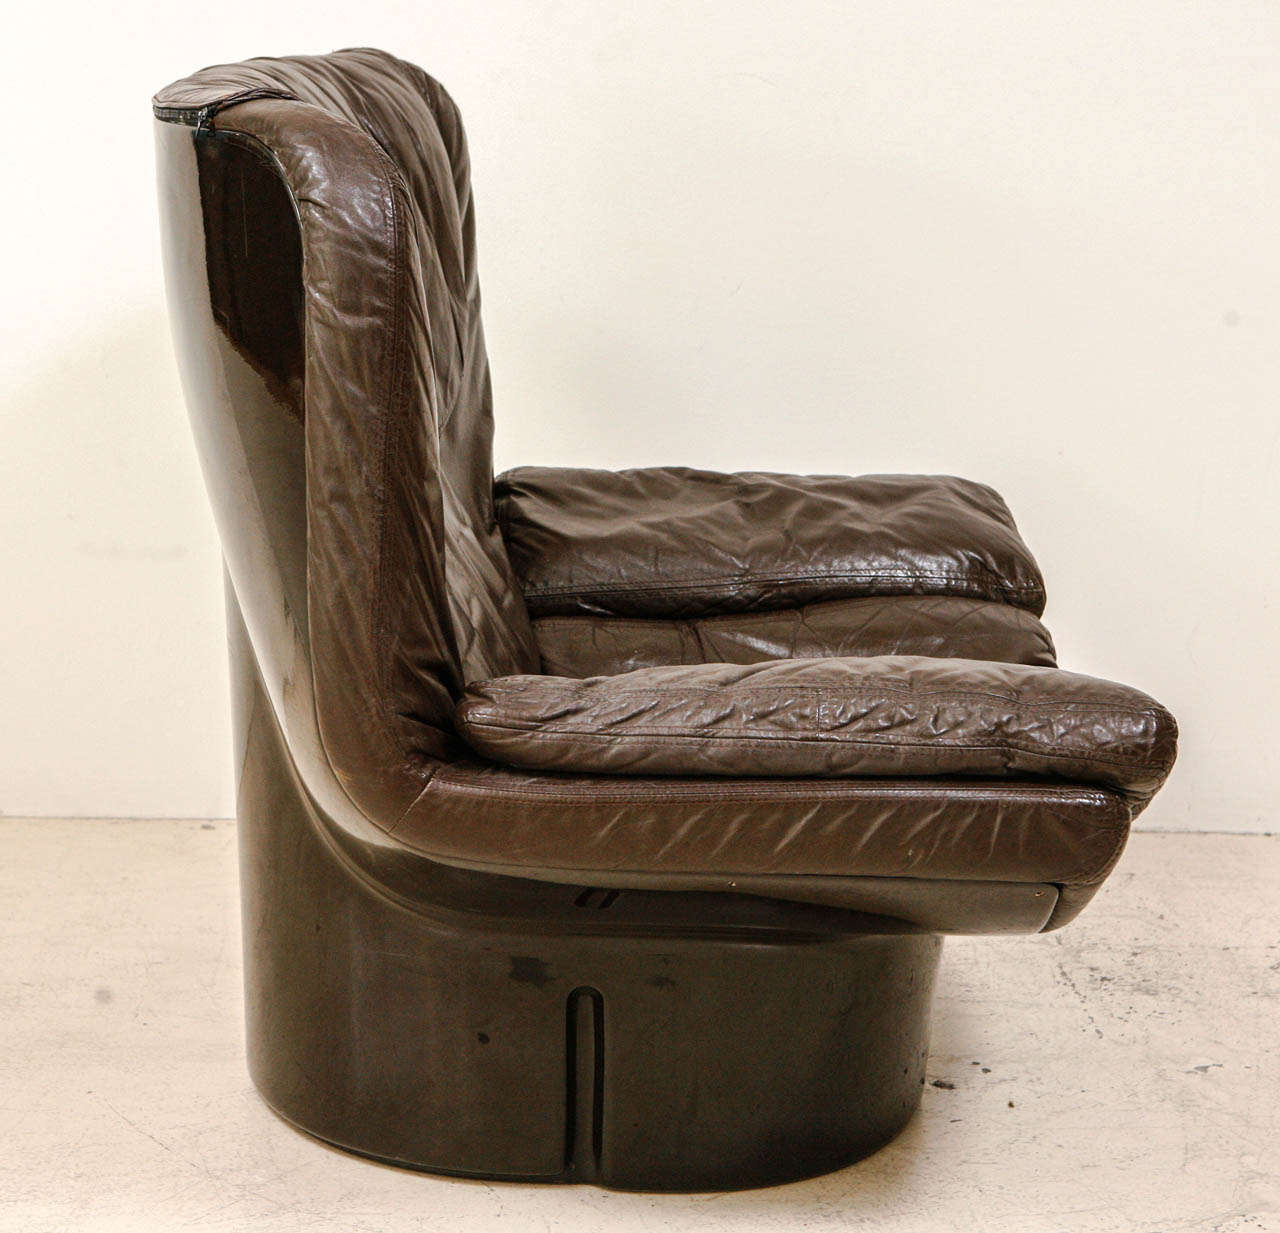 Leather Lounge Chair by Comfort designed by T.Ammannati & G.P Viitelli